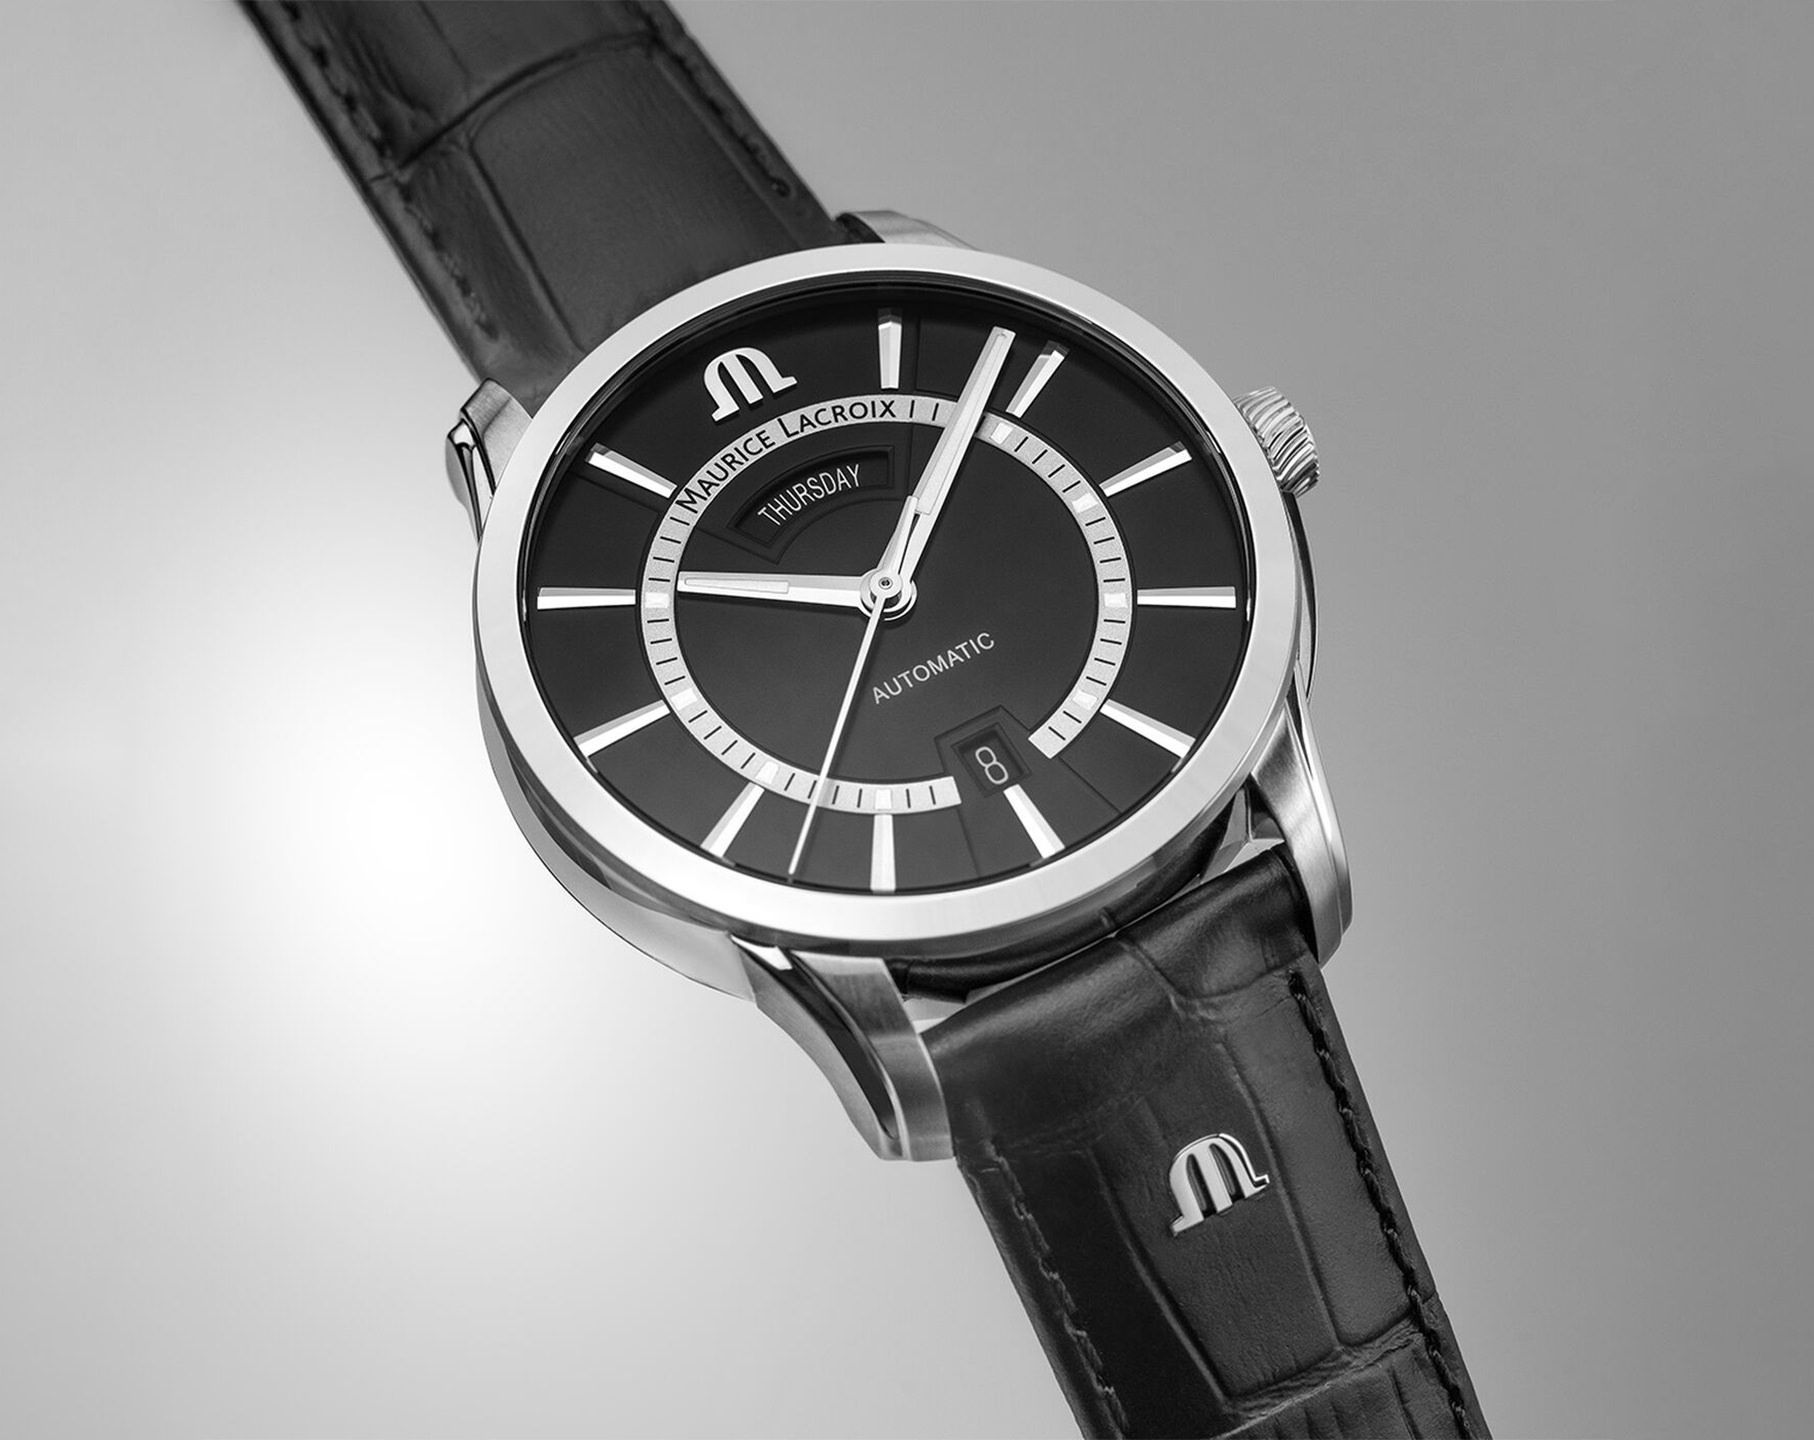 Lacroix Black Maurice in Watch mm Dial Pontos 40.5